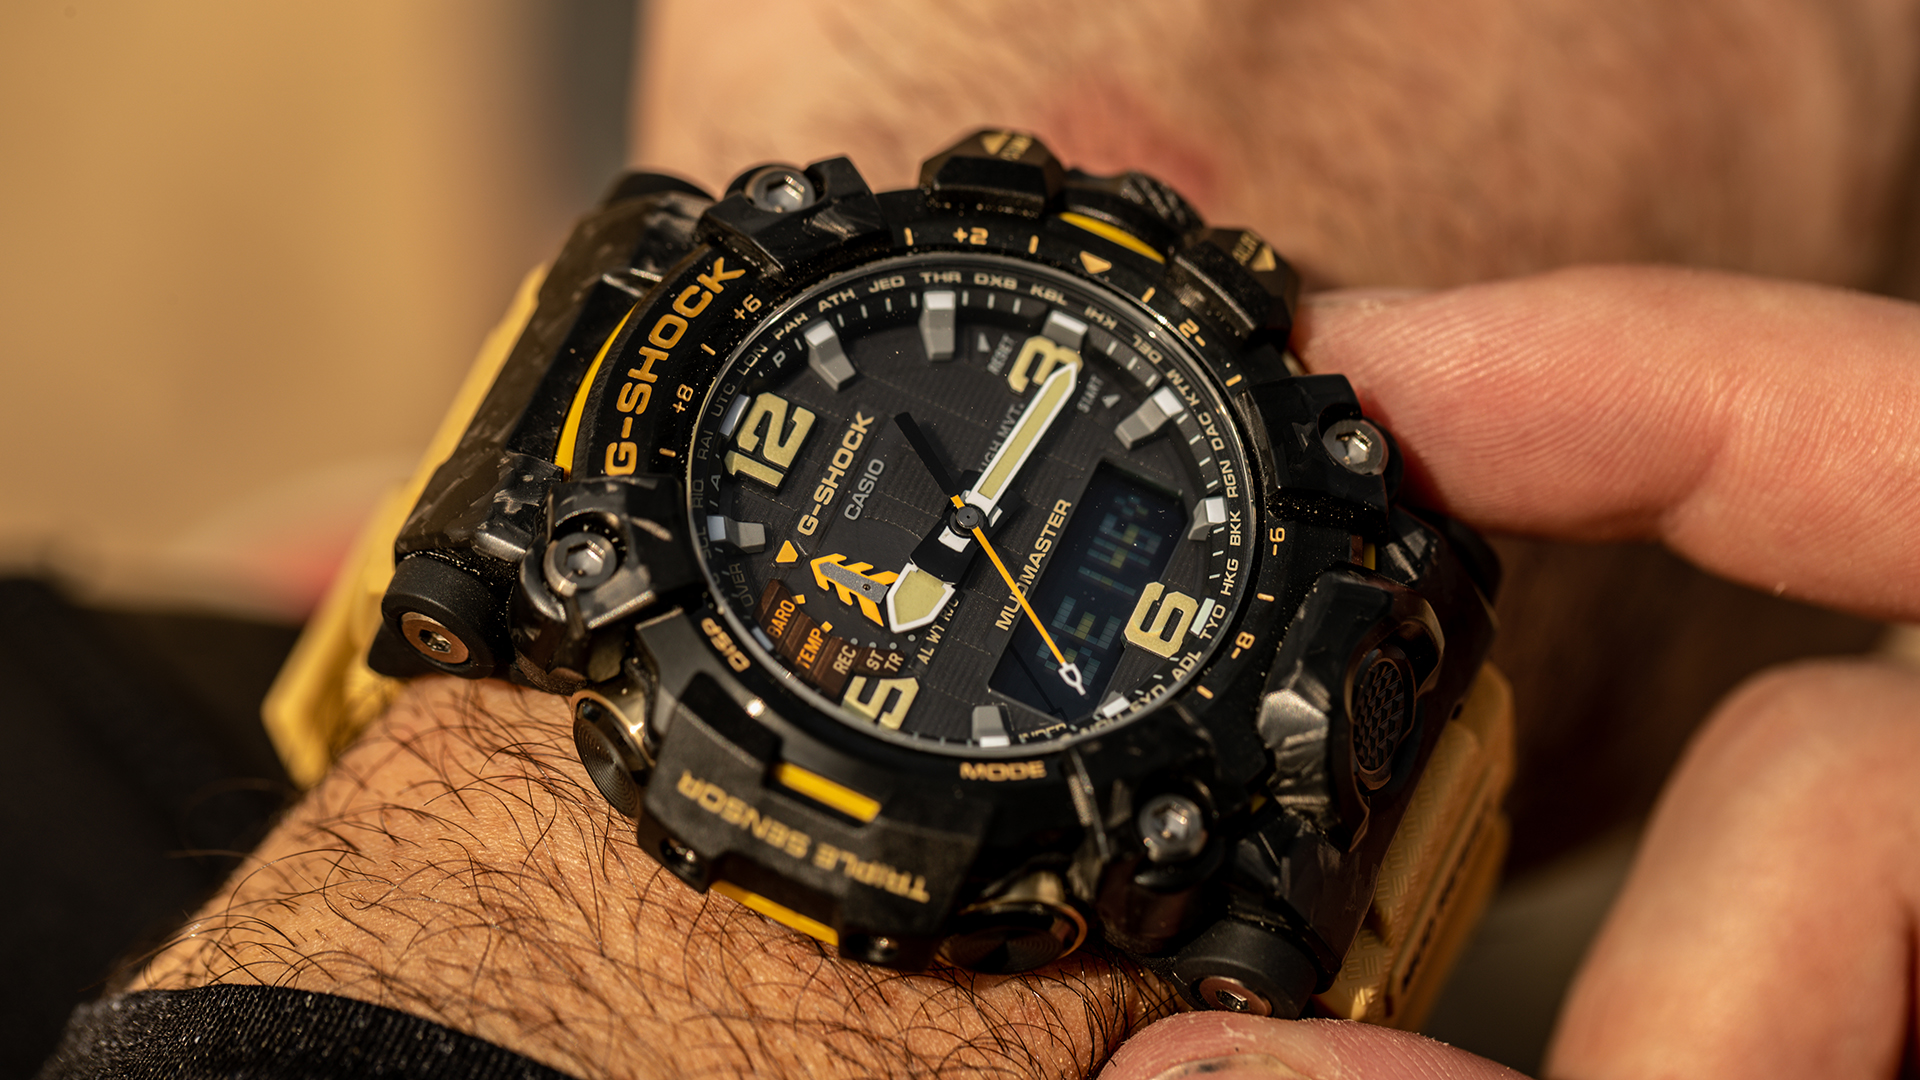 New G-SHOCK MUDMASTER GWG-2000 watch will be the first to use